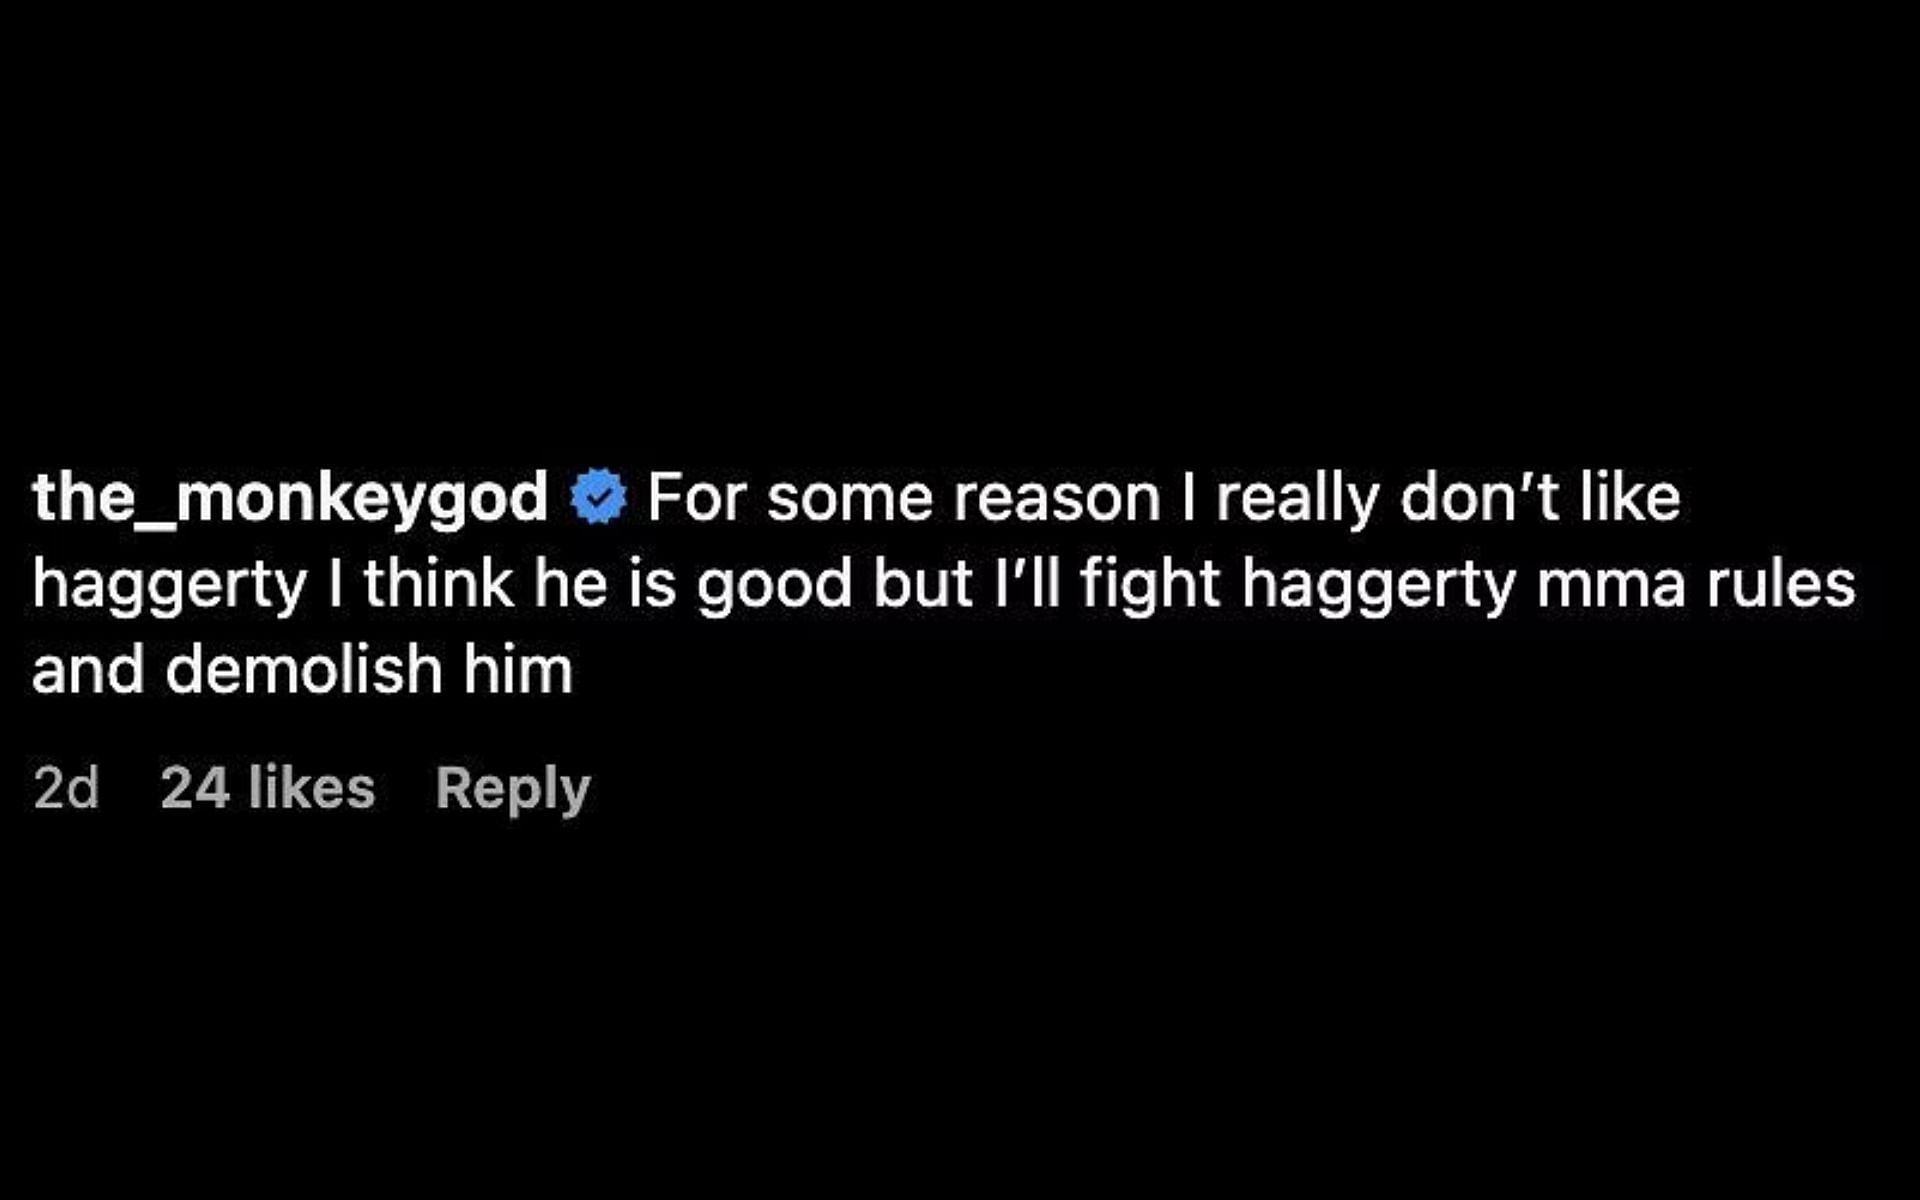 Jarred Brooks&#039; comment on the video